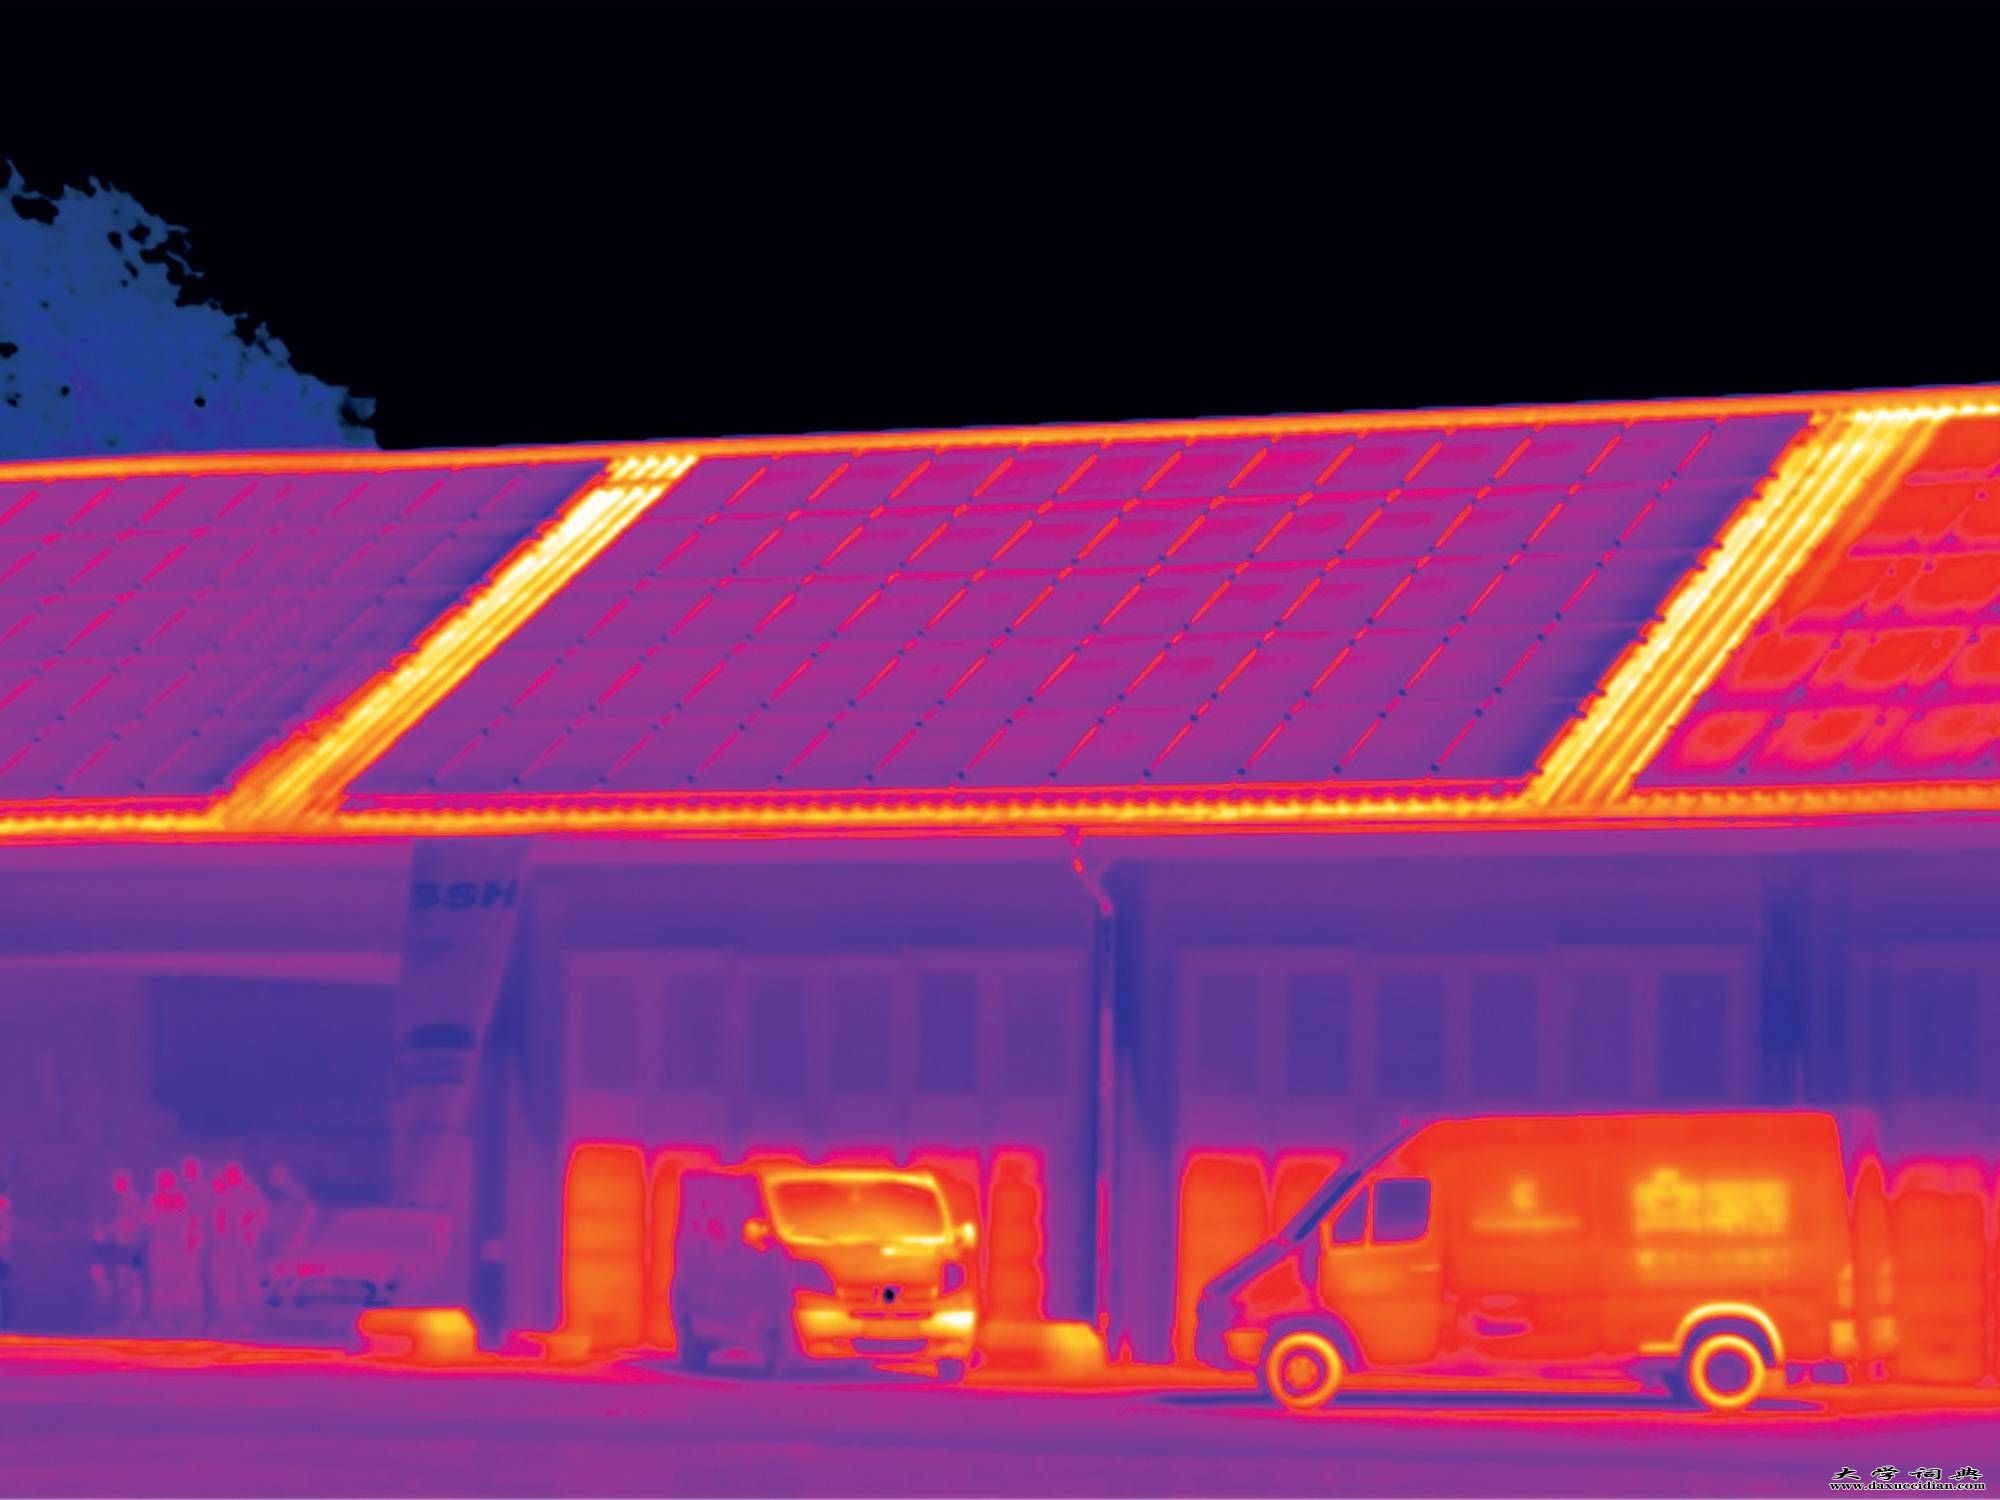 Thermal image of photovoltaic plant on roof